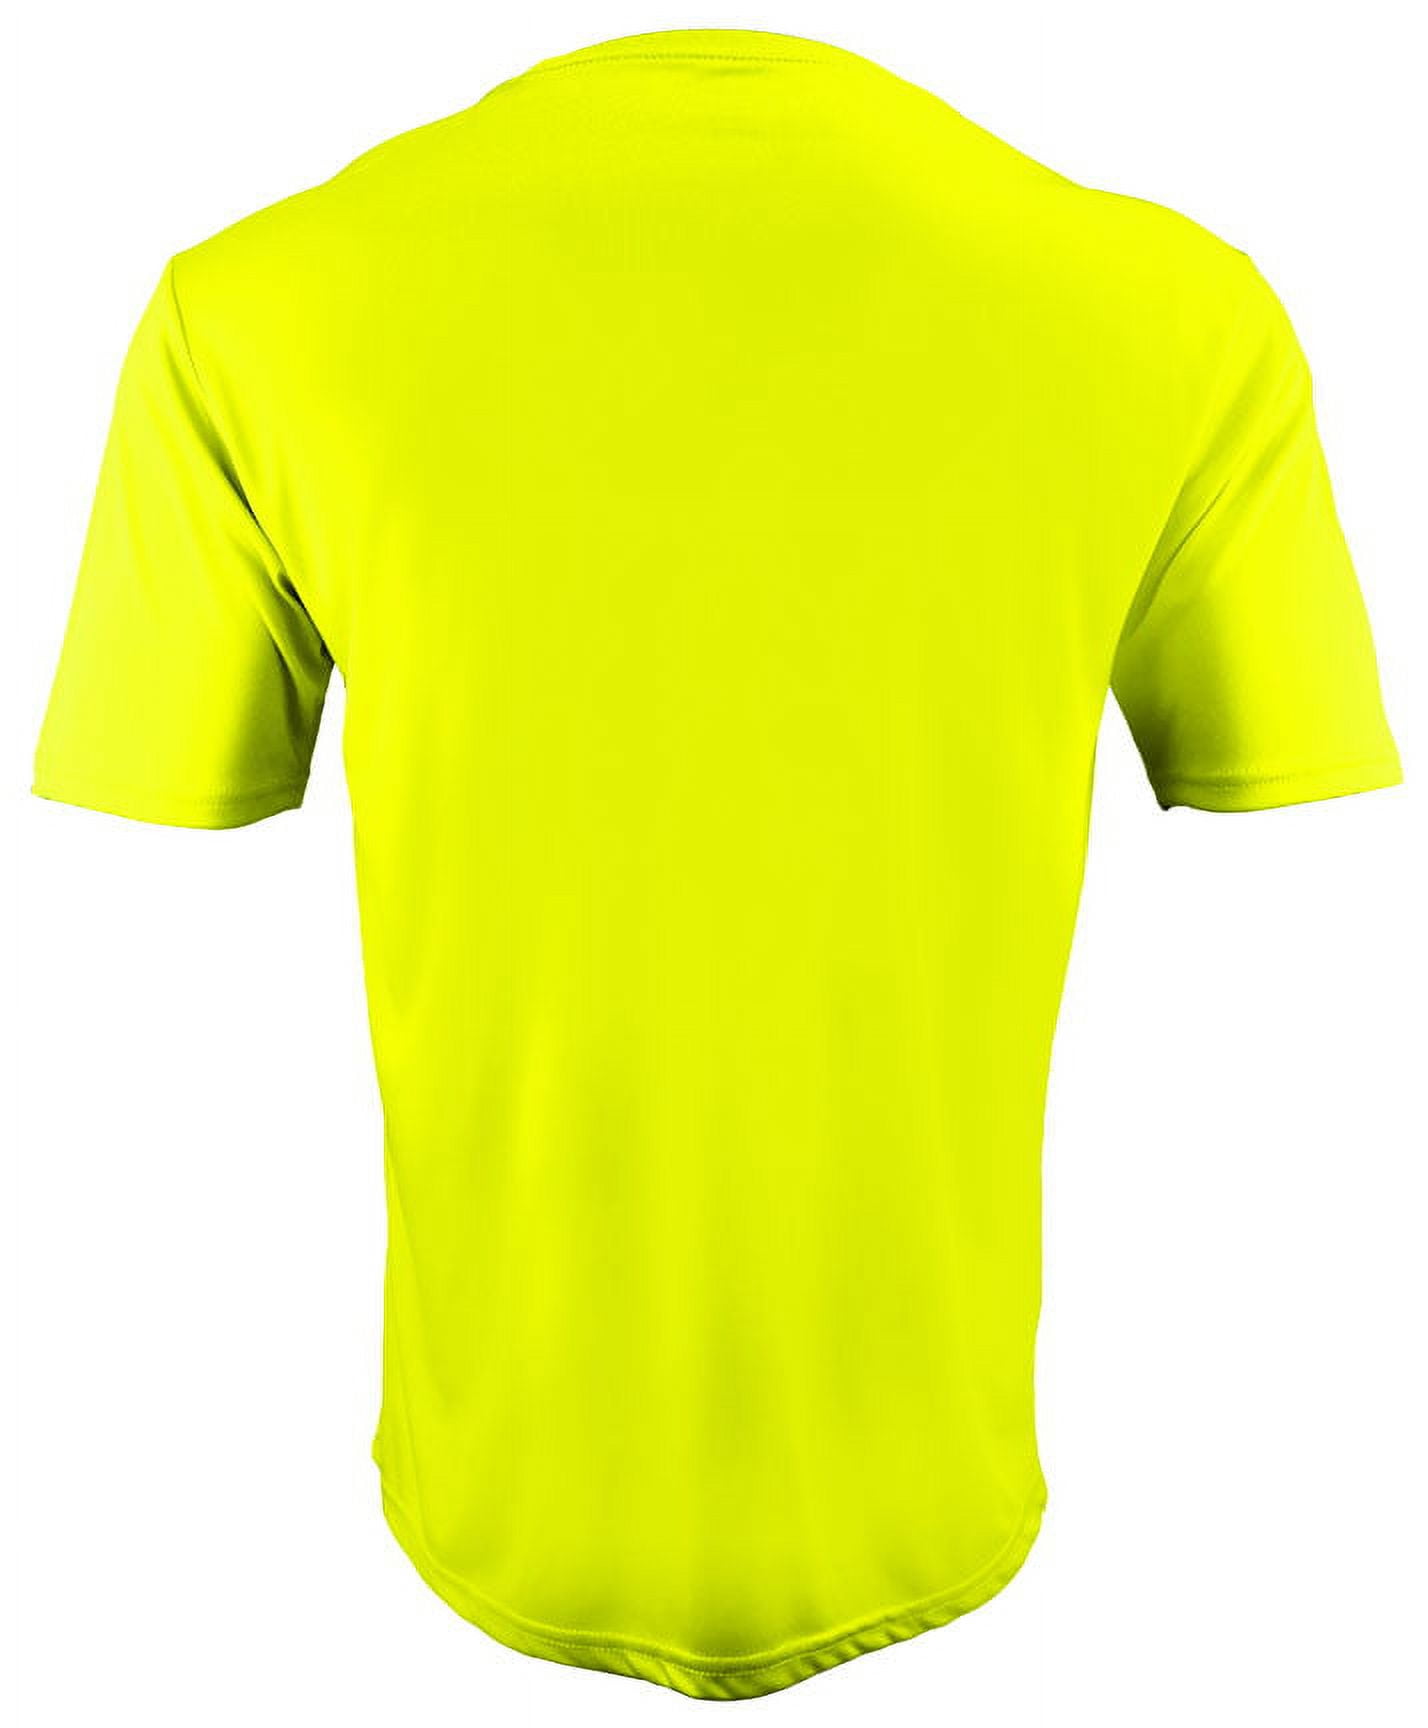 Epic Adult Cool Performance Dry-Fit Crew T-Shirt Jerseys 